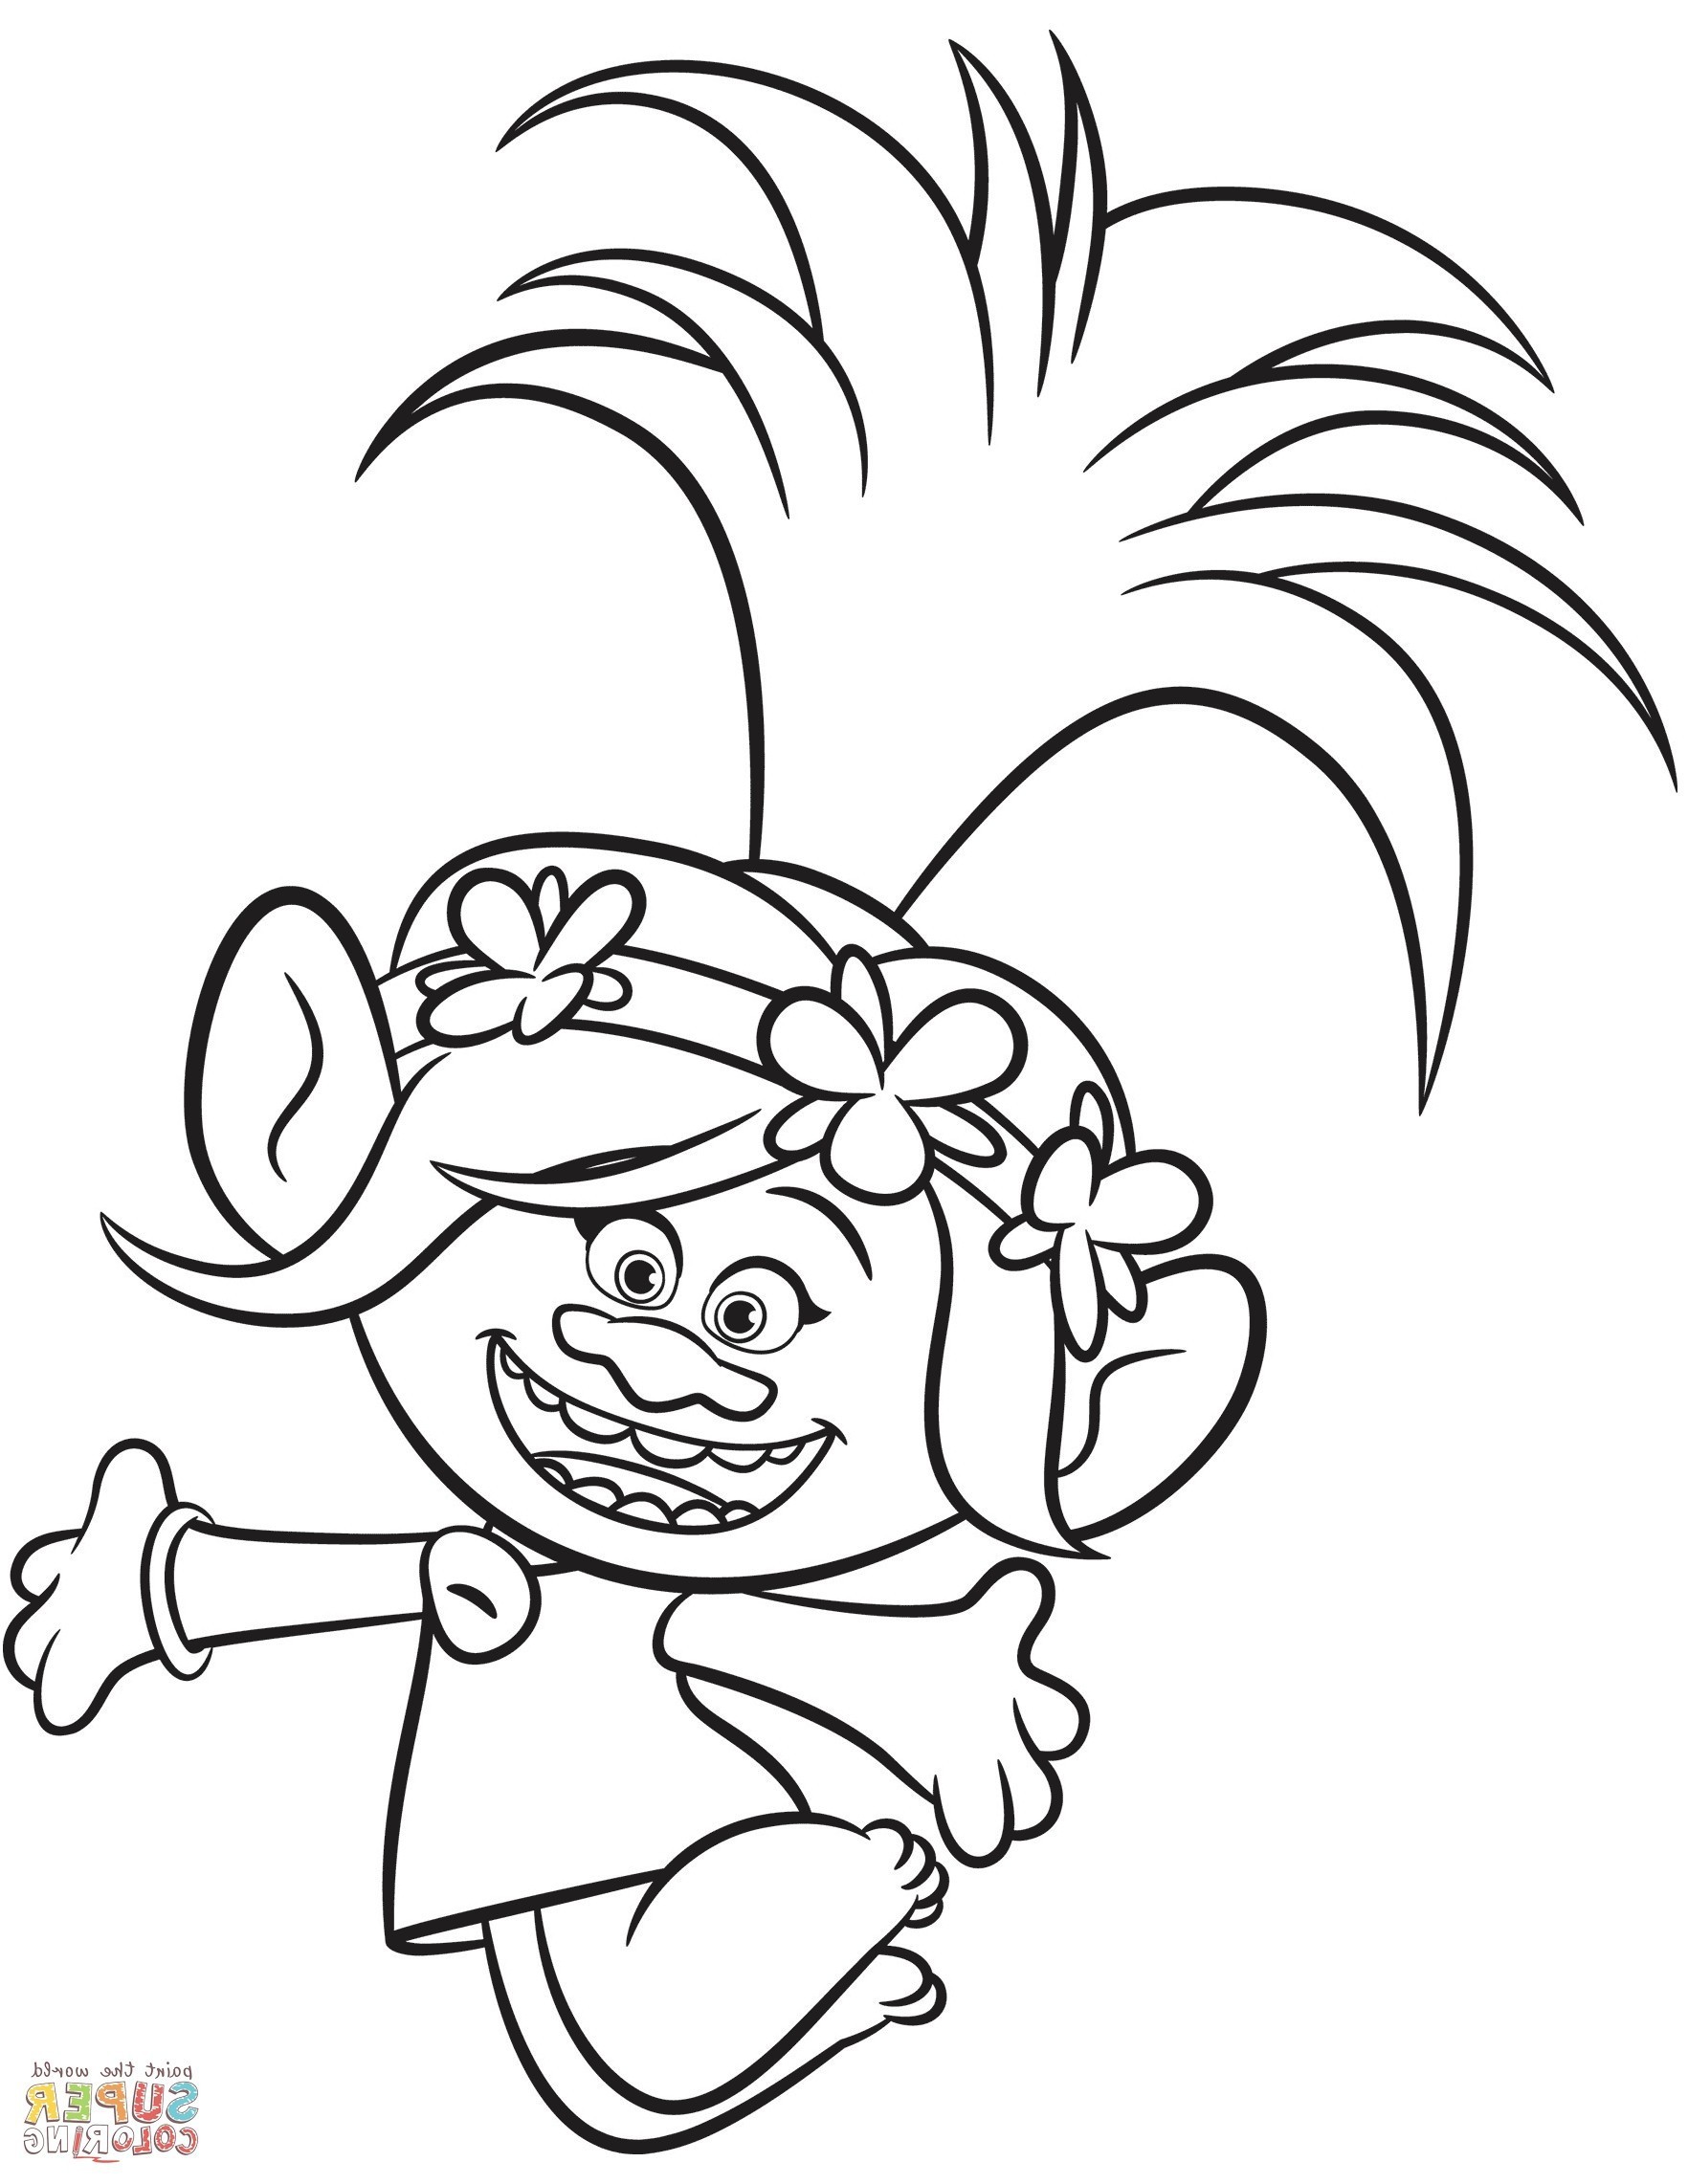 Poppy the Troll Coloring Page Wallpaper